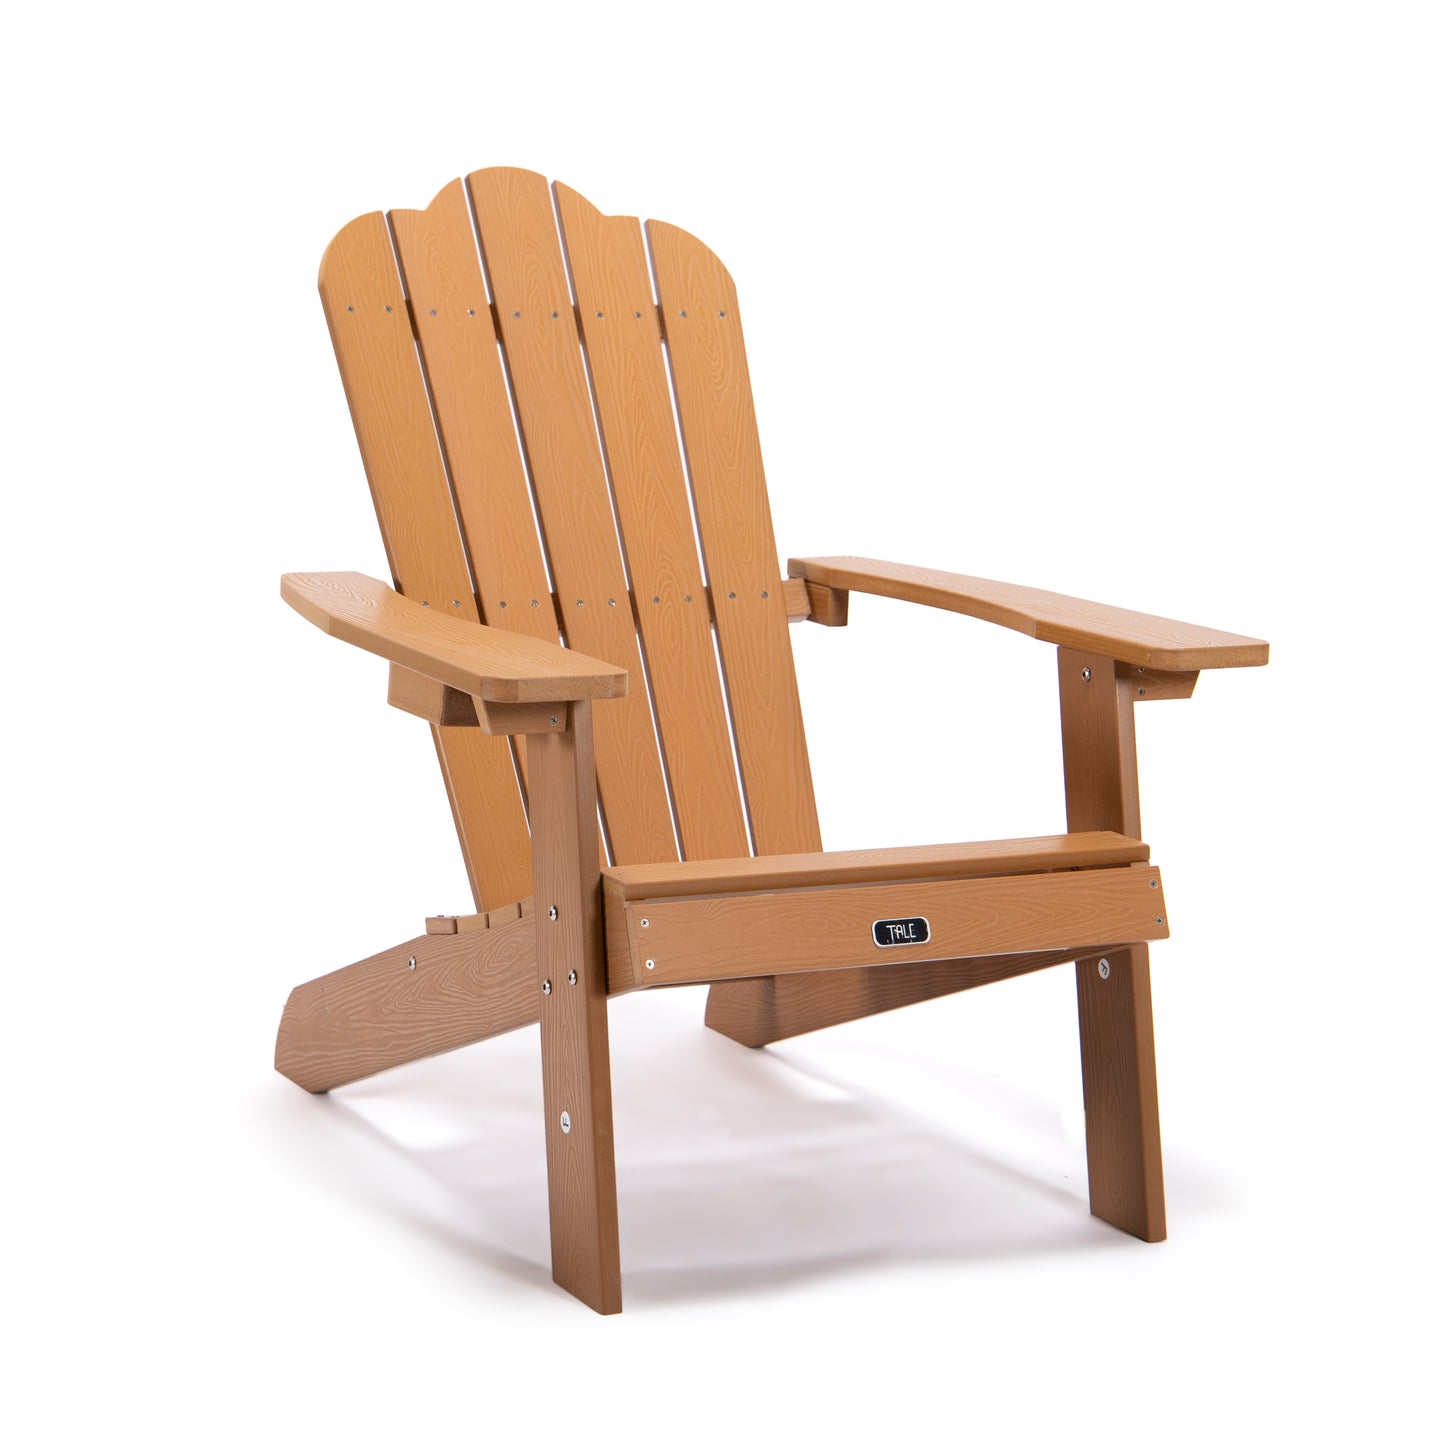 TALE Adirondack Chair Backyard Outdoor Furniture Painted Seating With Cup Holder All-Weather And Fade-Resistant Plastic Wood - Brown Color